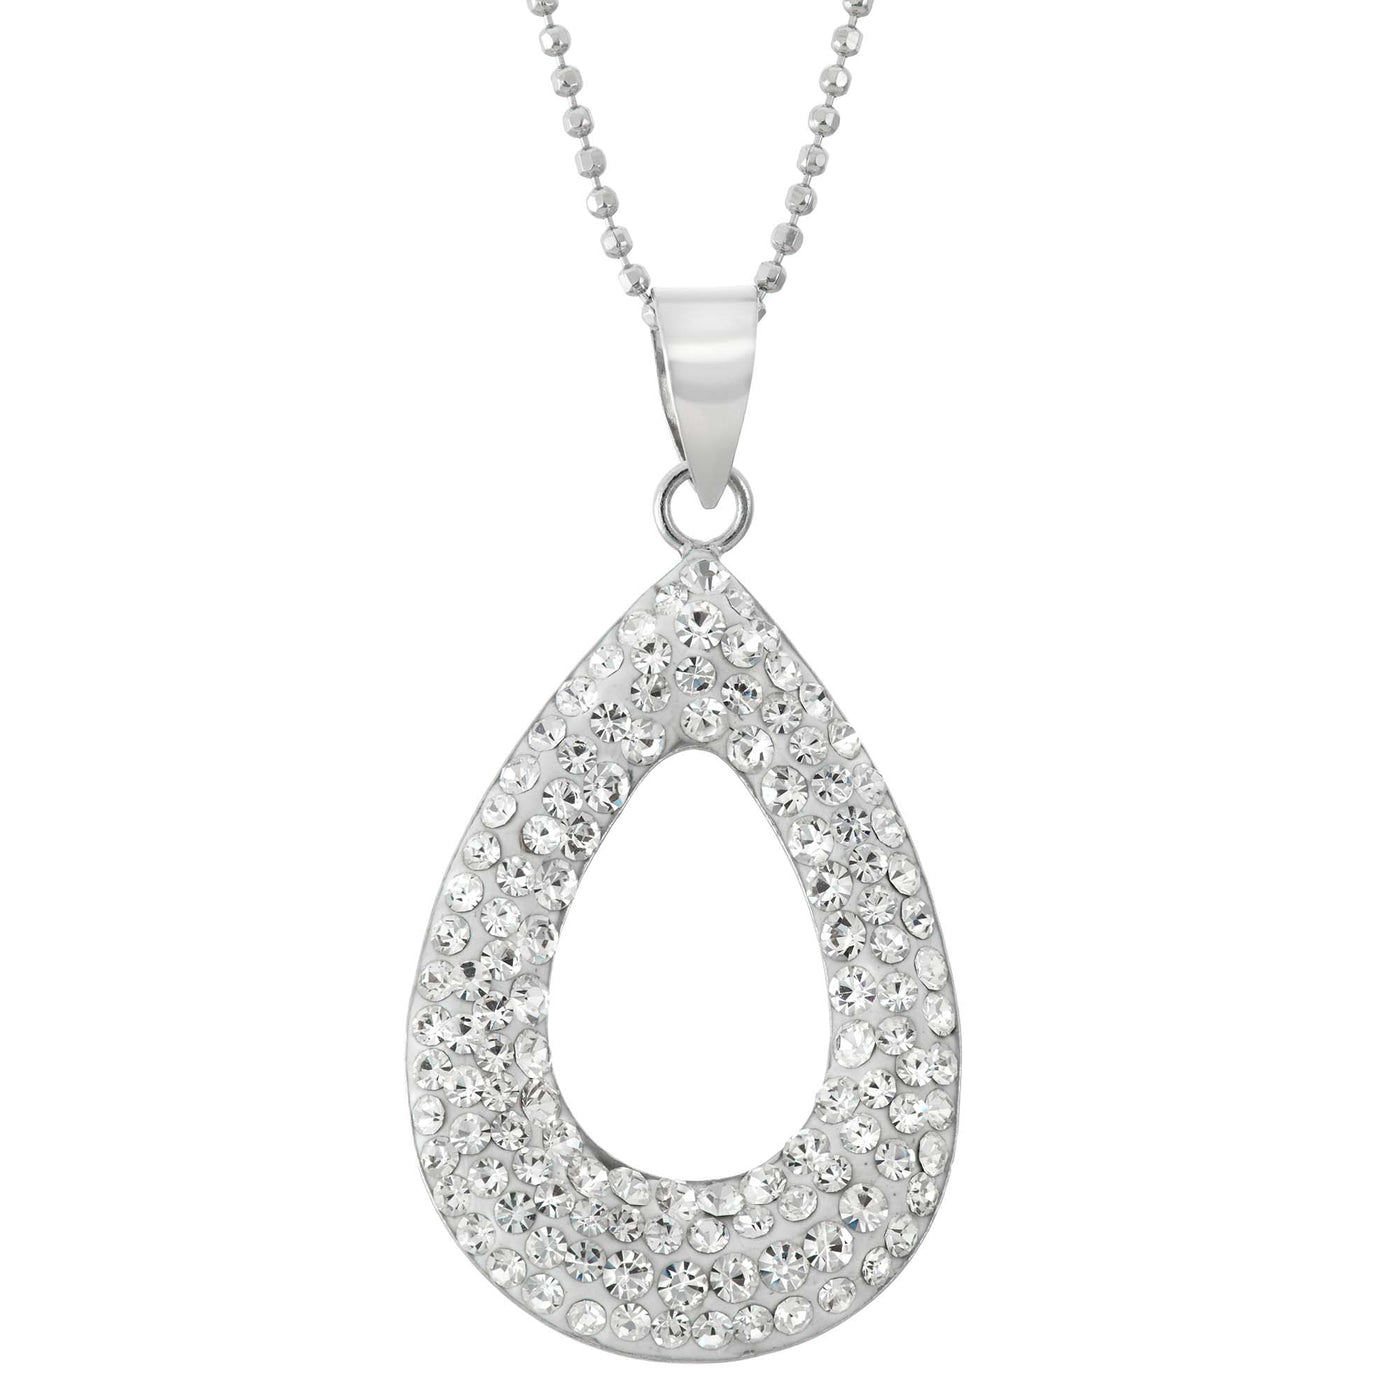 Rebecca Sloane Silver Pendant Studded With White Crystals